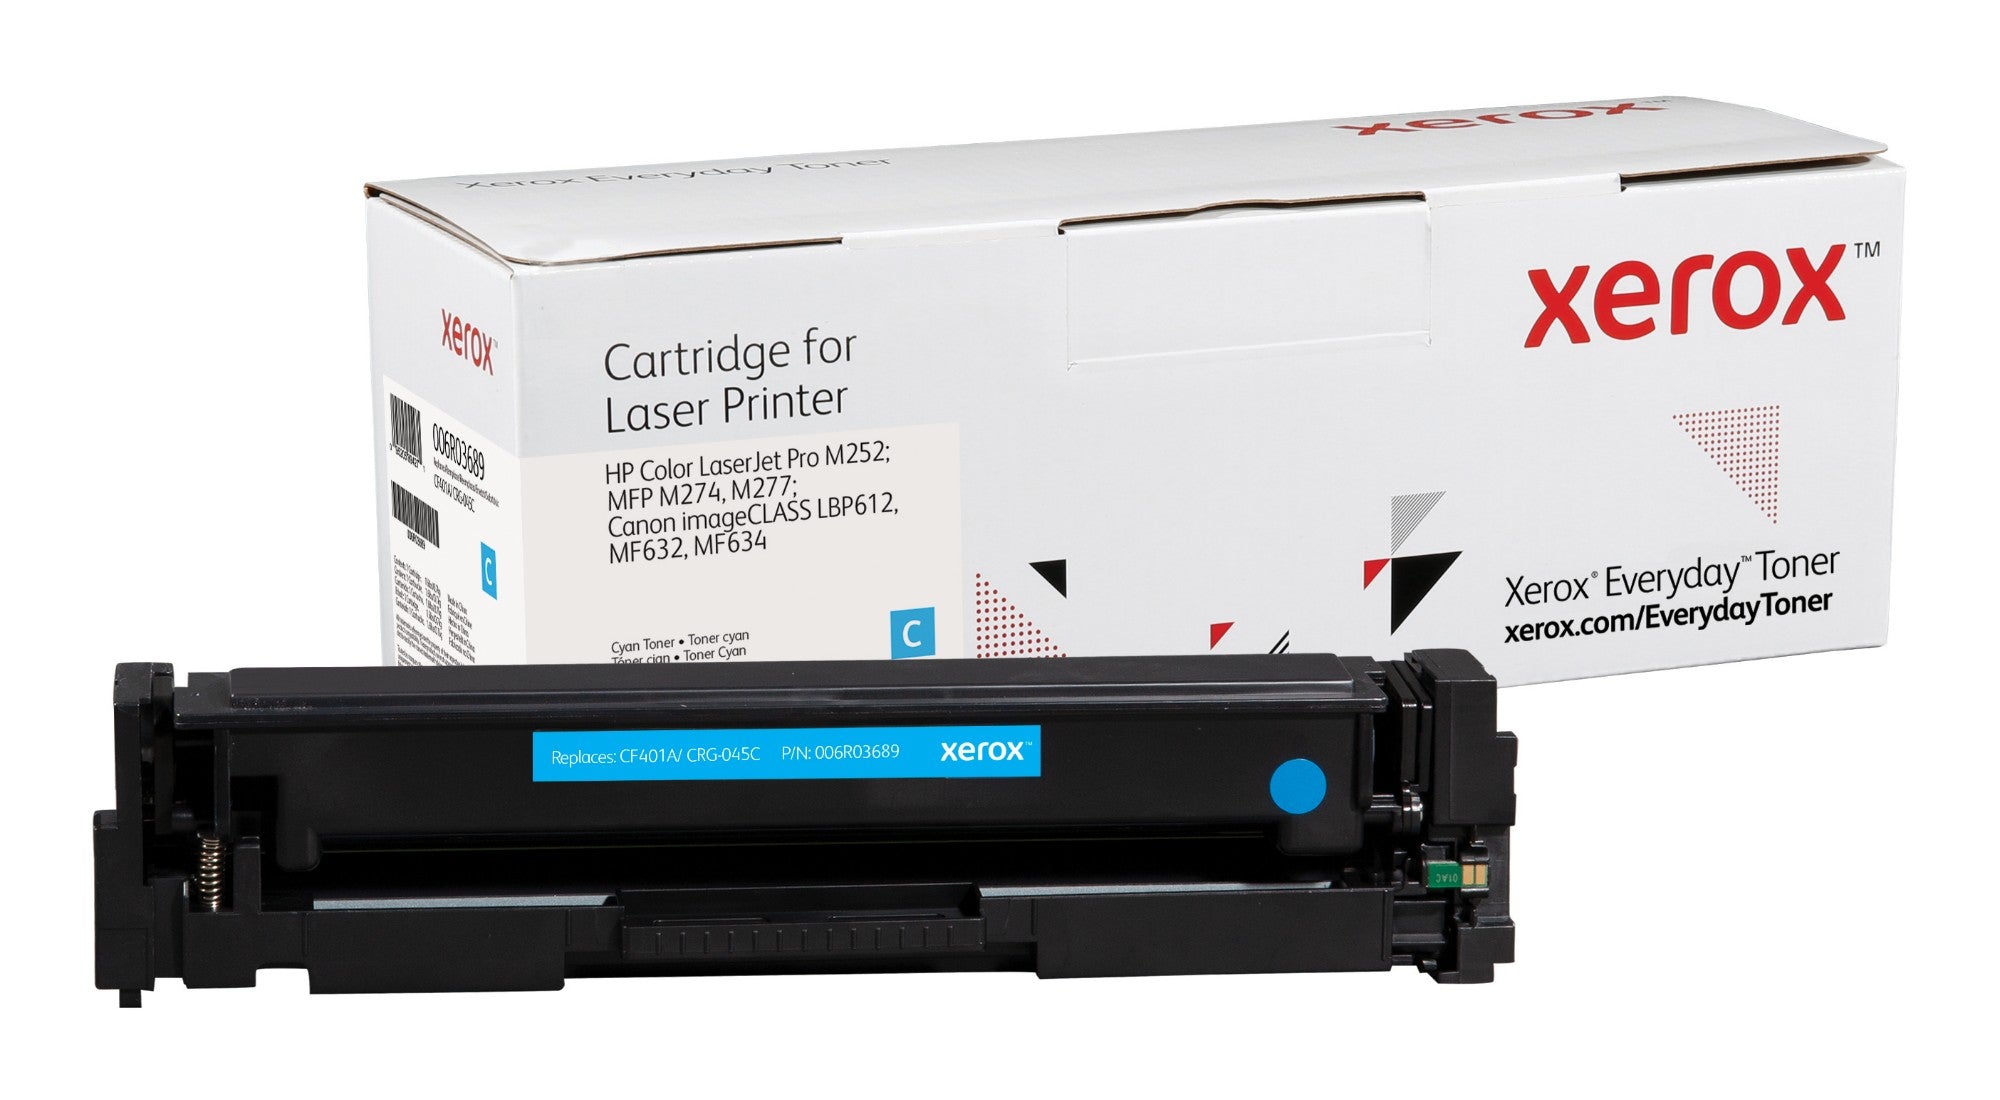 Xerox 006R03689 Toner cartridge cyan, 1.4K pages (replaces Canon 045 HP 201A/CF401A) for Canon LBP-611/HP Pro M 252